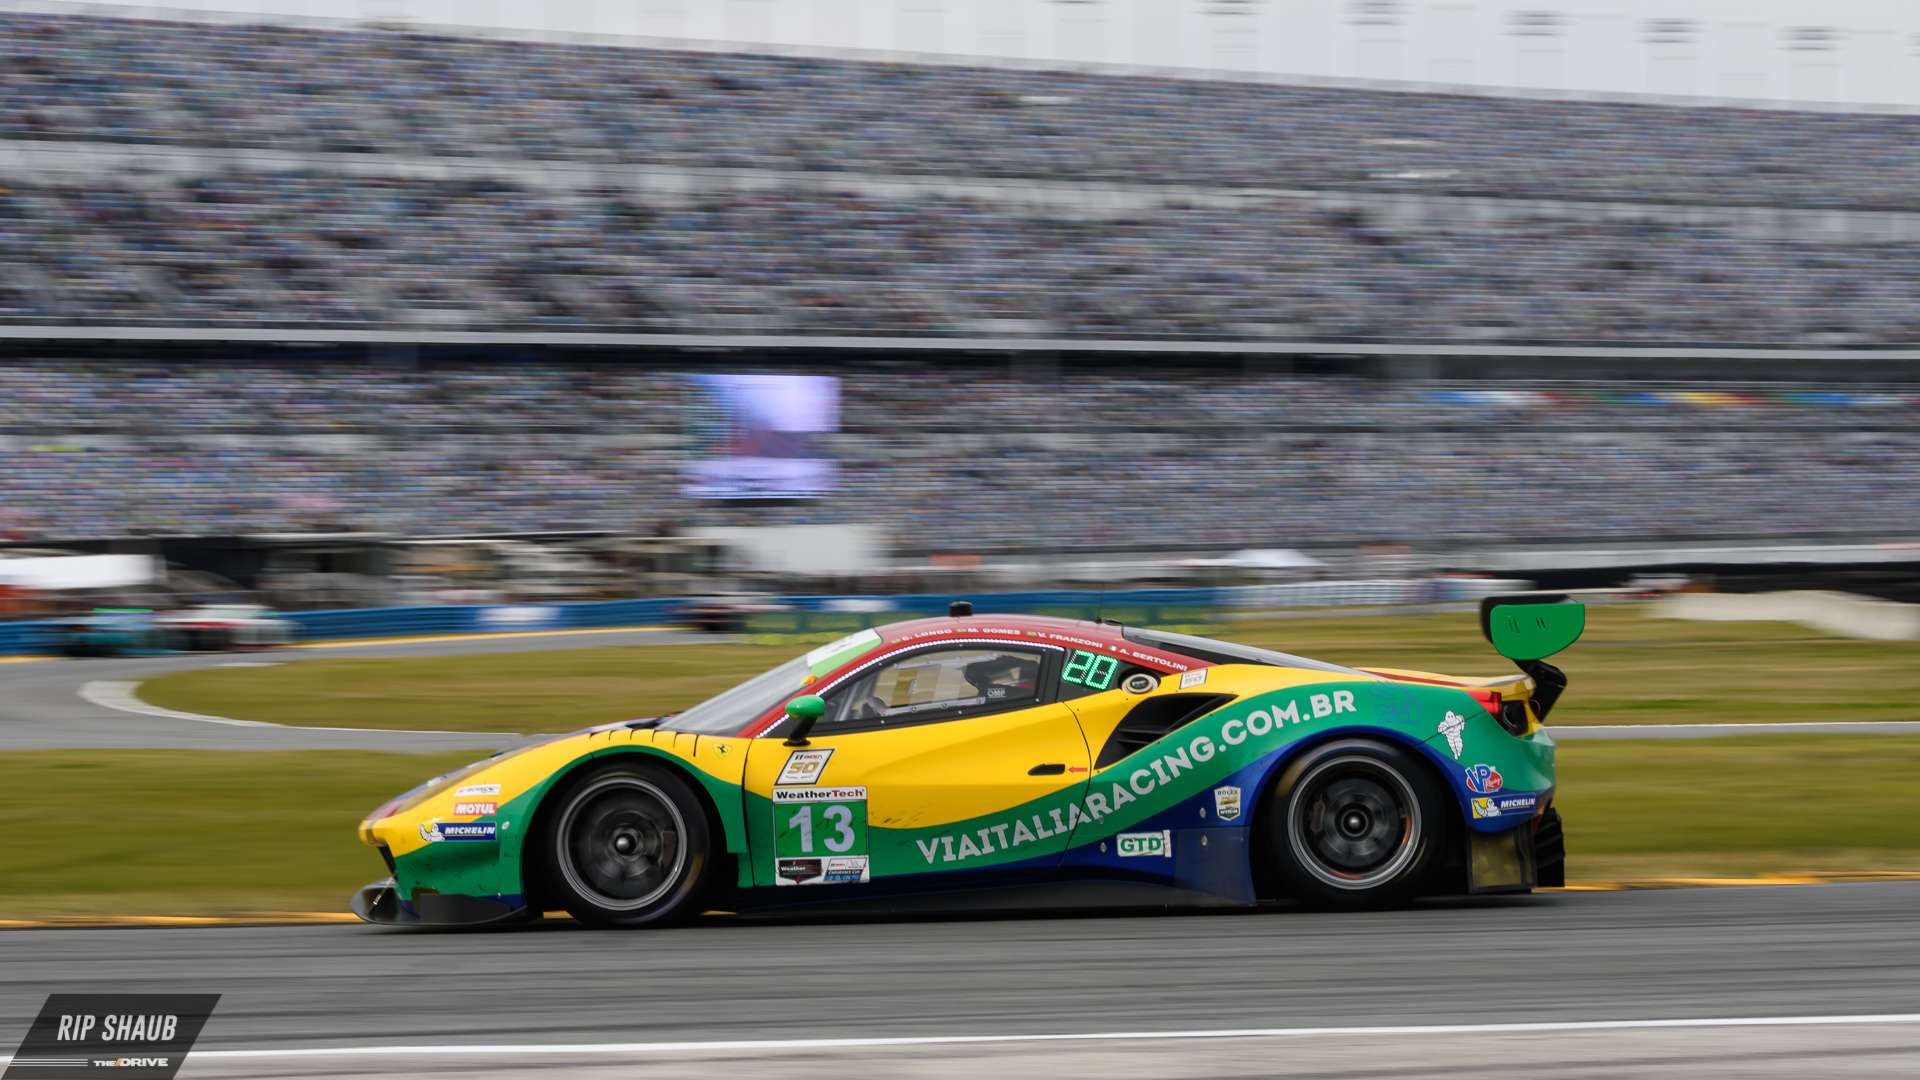 Hottest Liveries From the 2019 Rolex 24 at Daytona